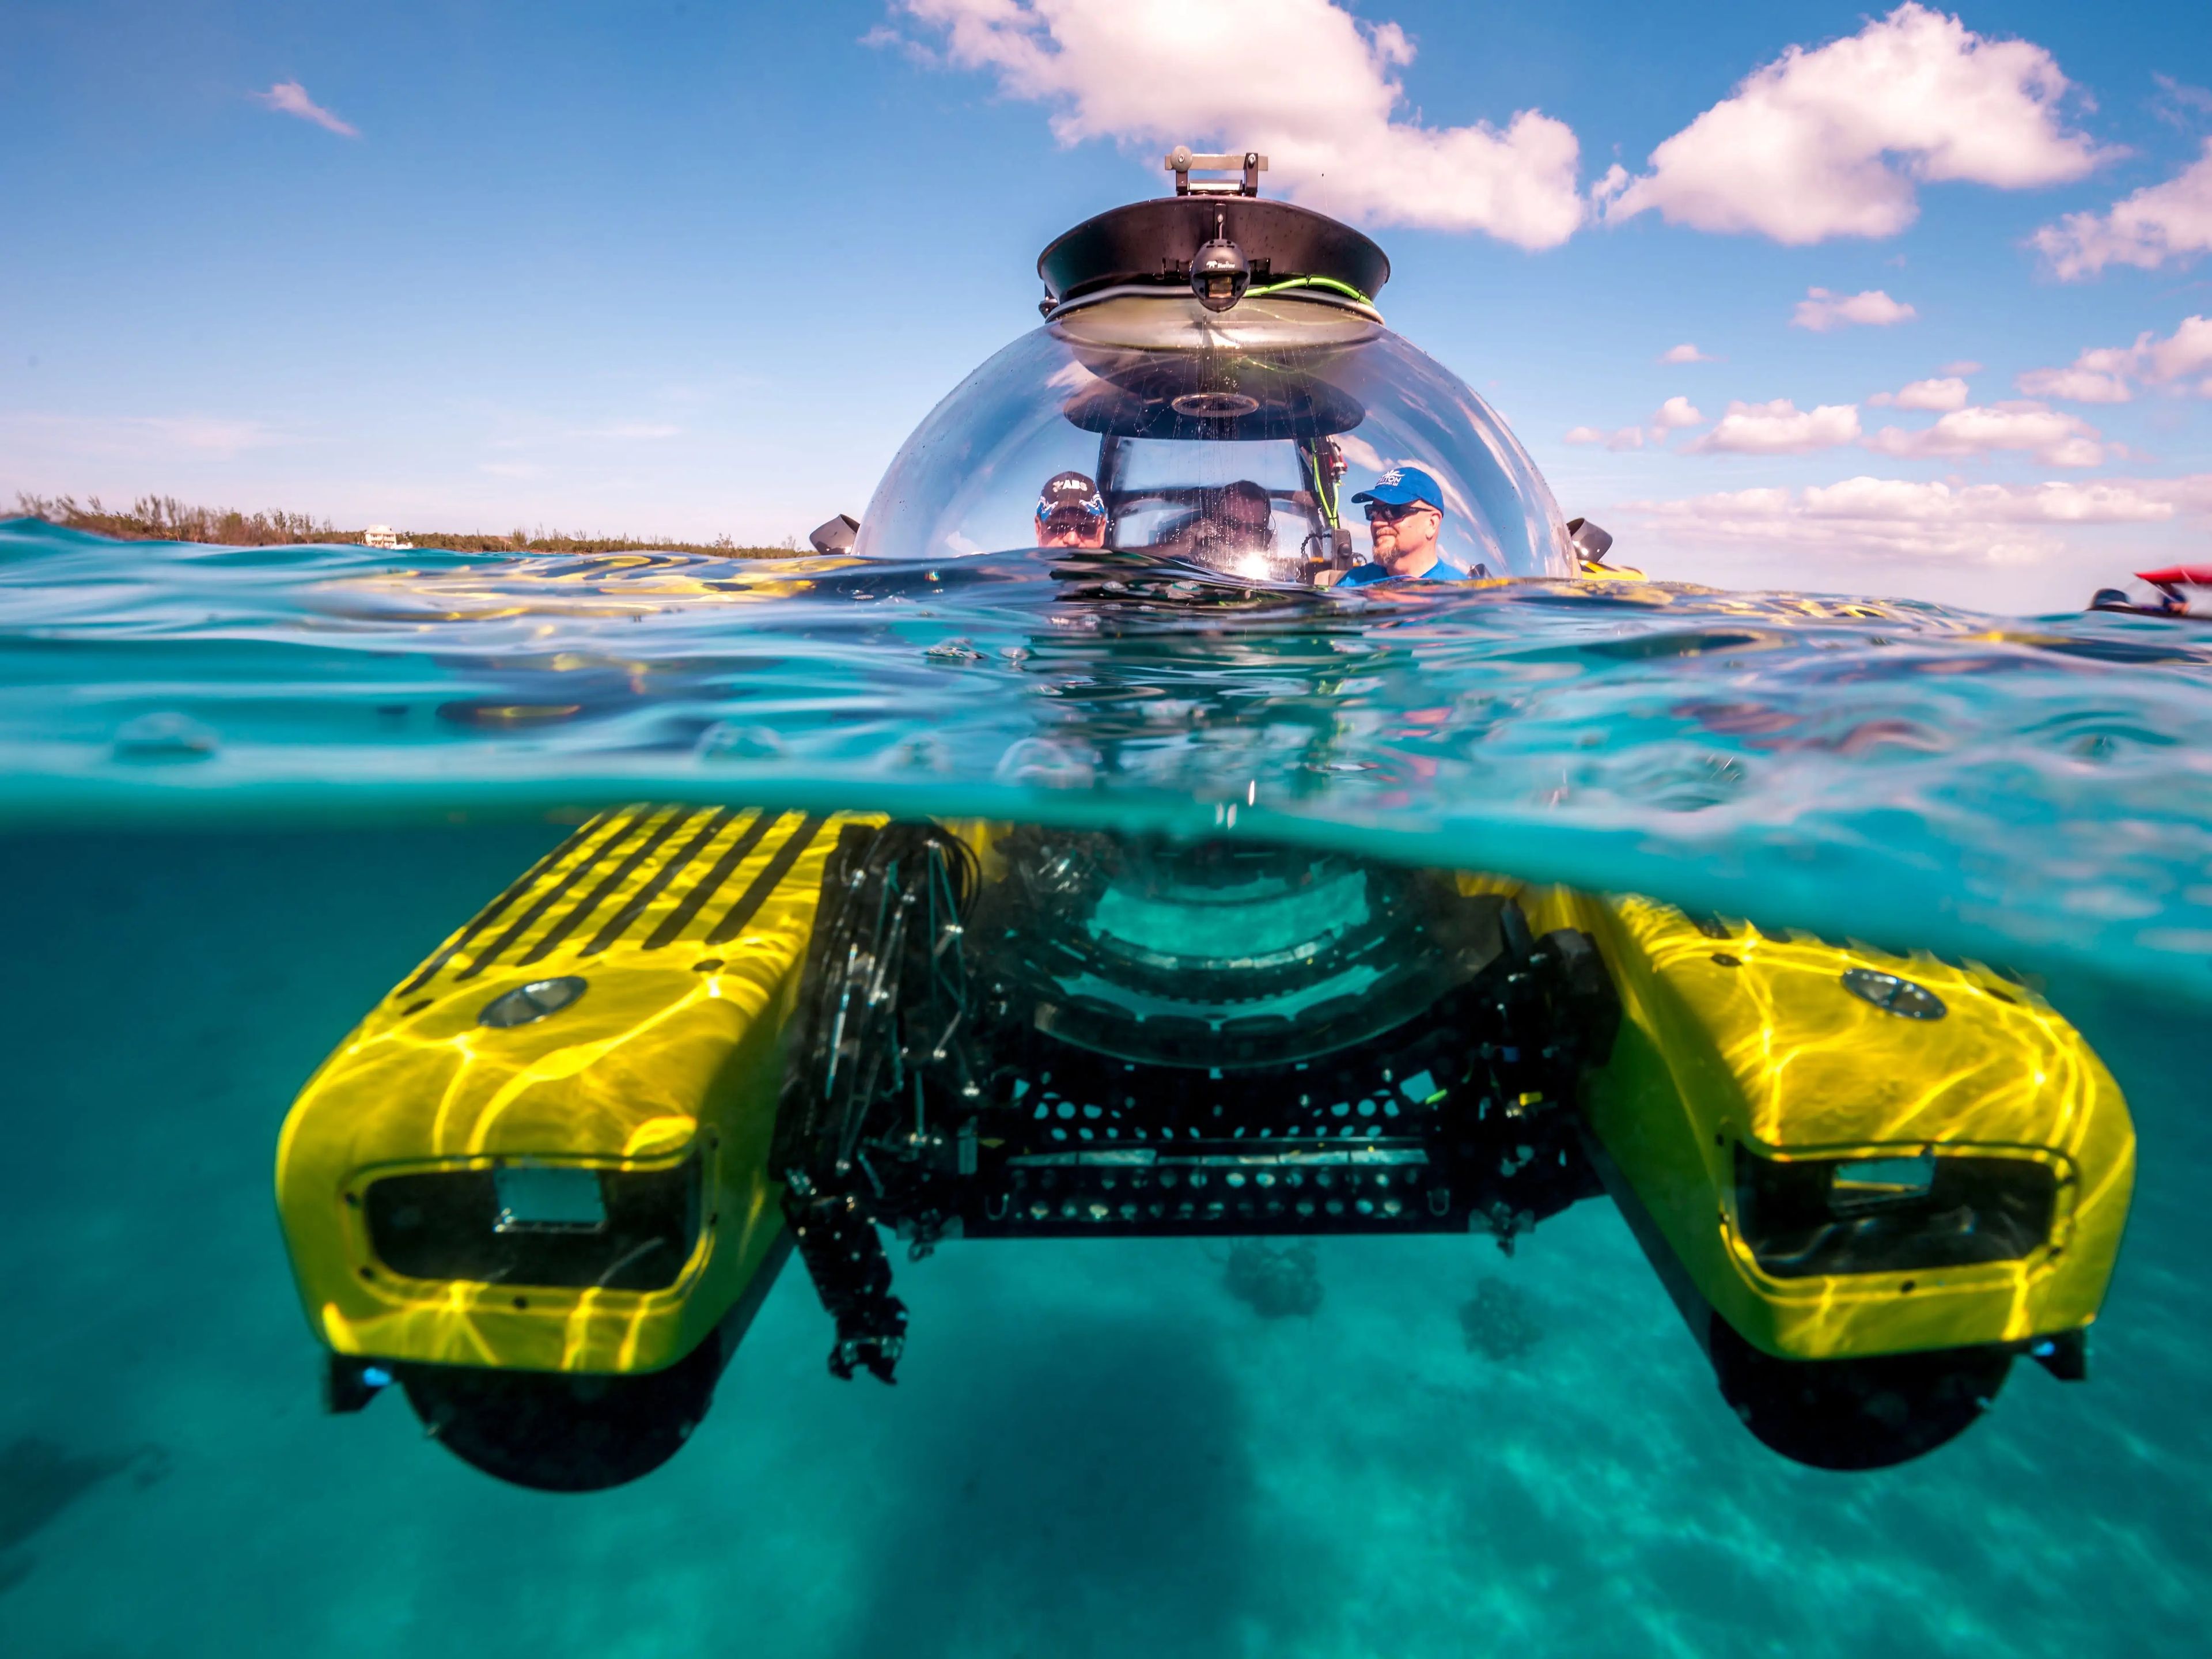 A Triton Submersible in the ocean.